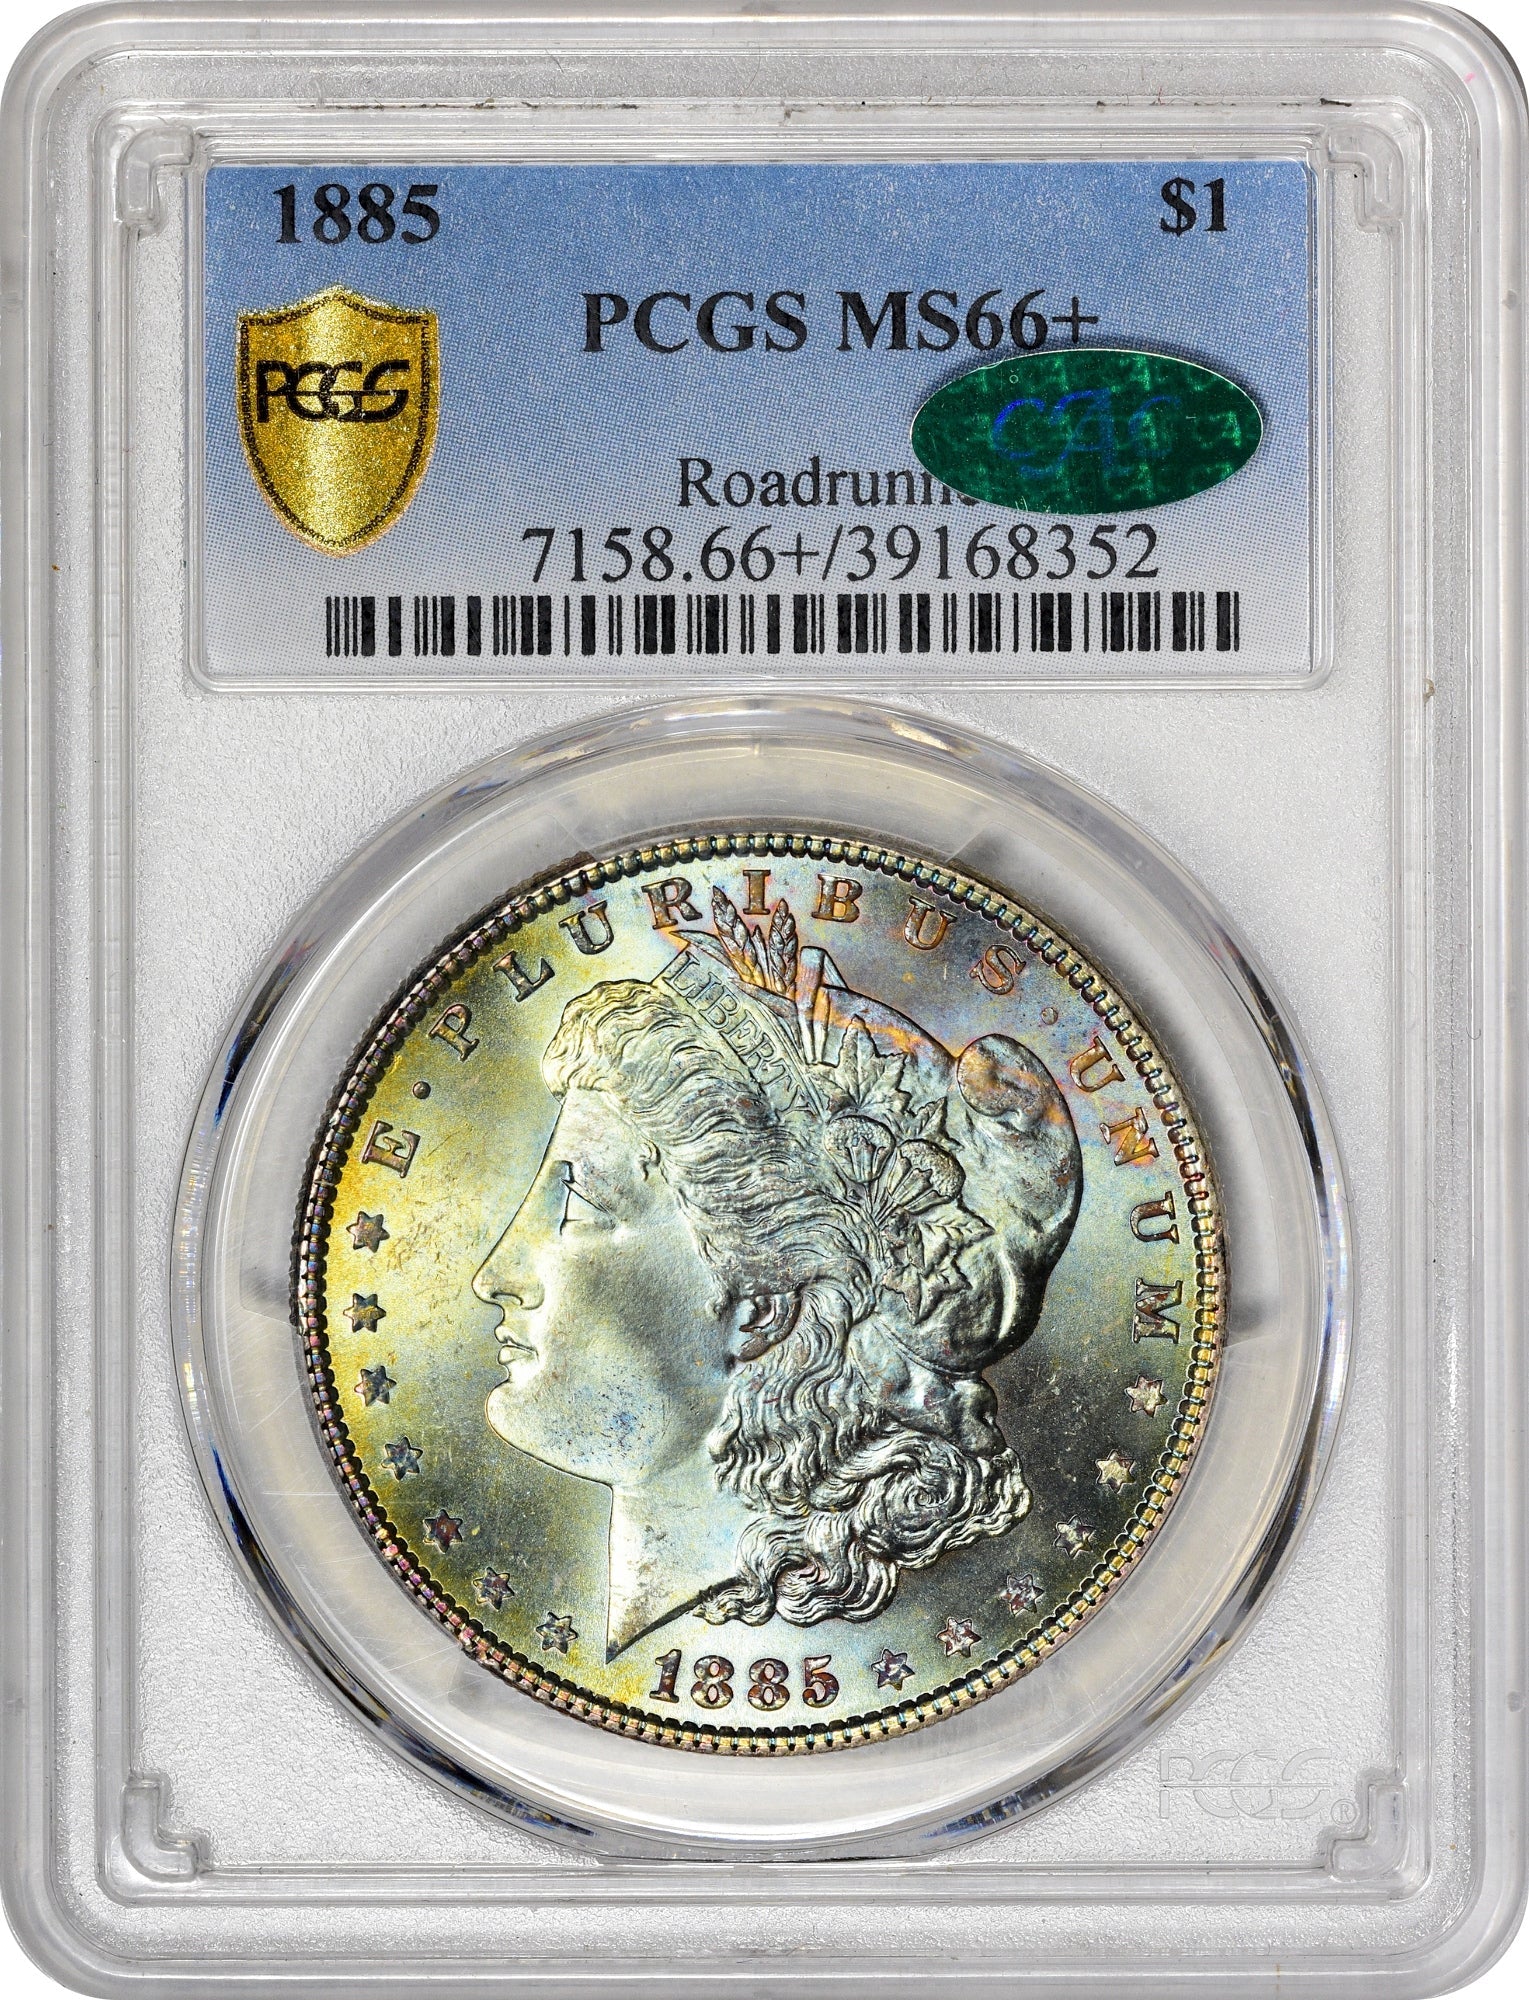 1885 $1 MS66+ PCGS CAC EX ROADRUNNER - Paradime Coins US Coins For Sale